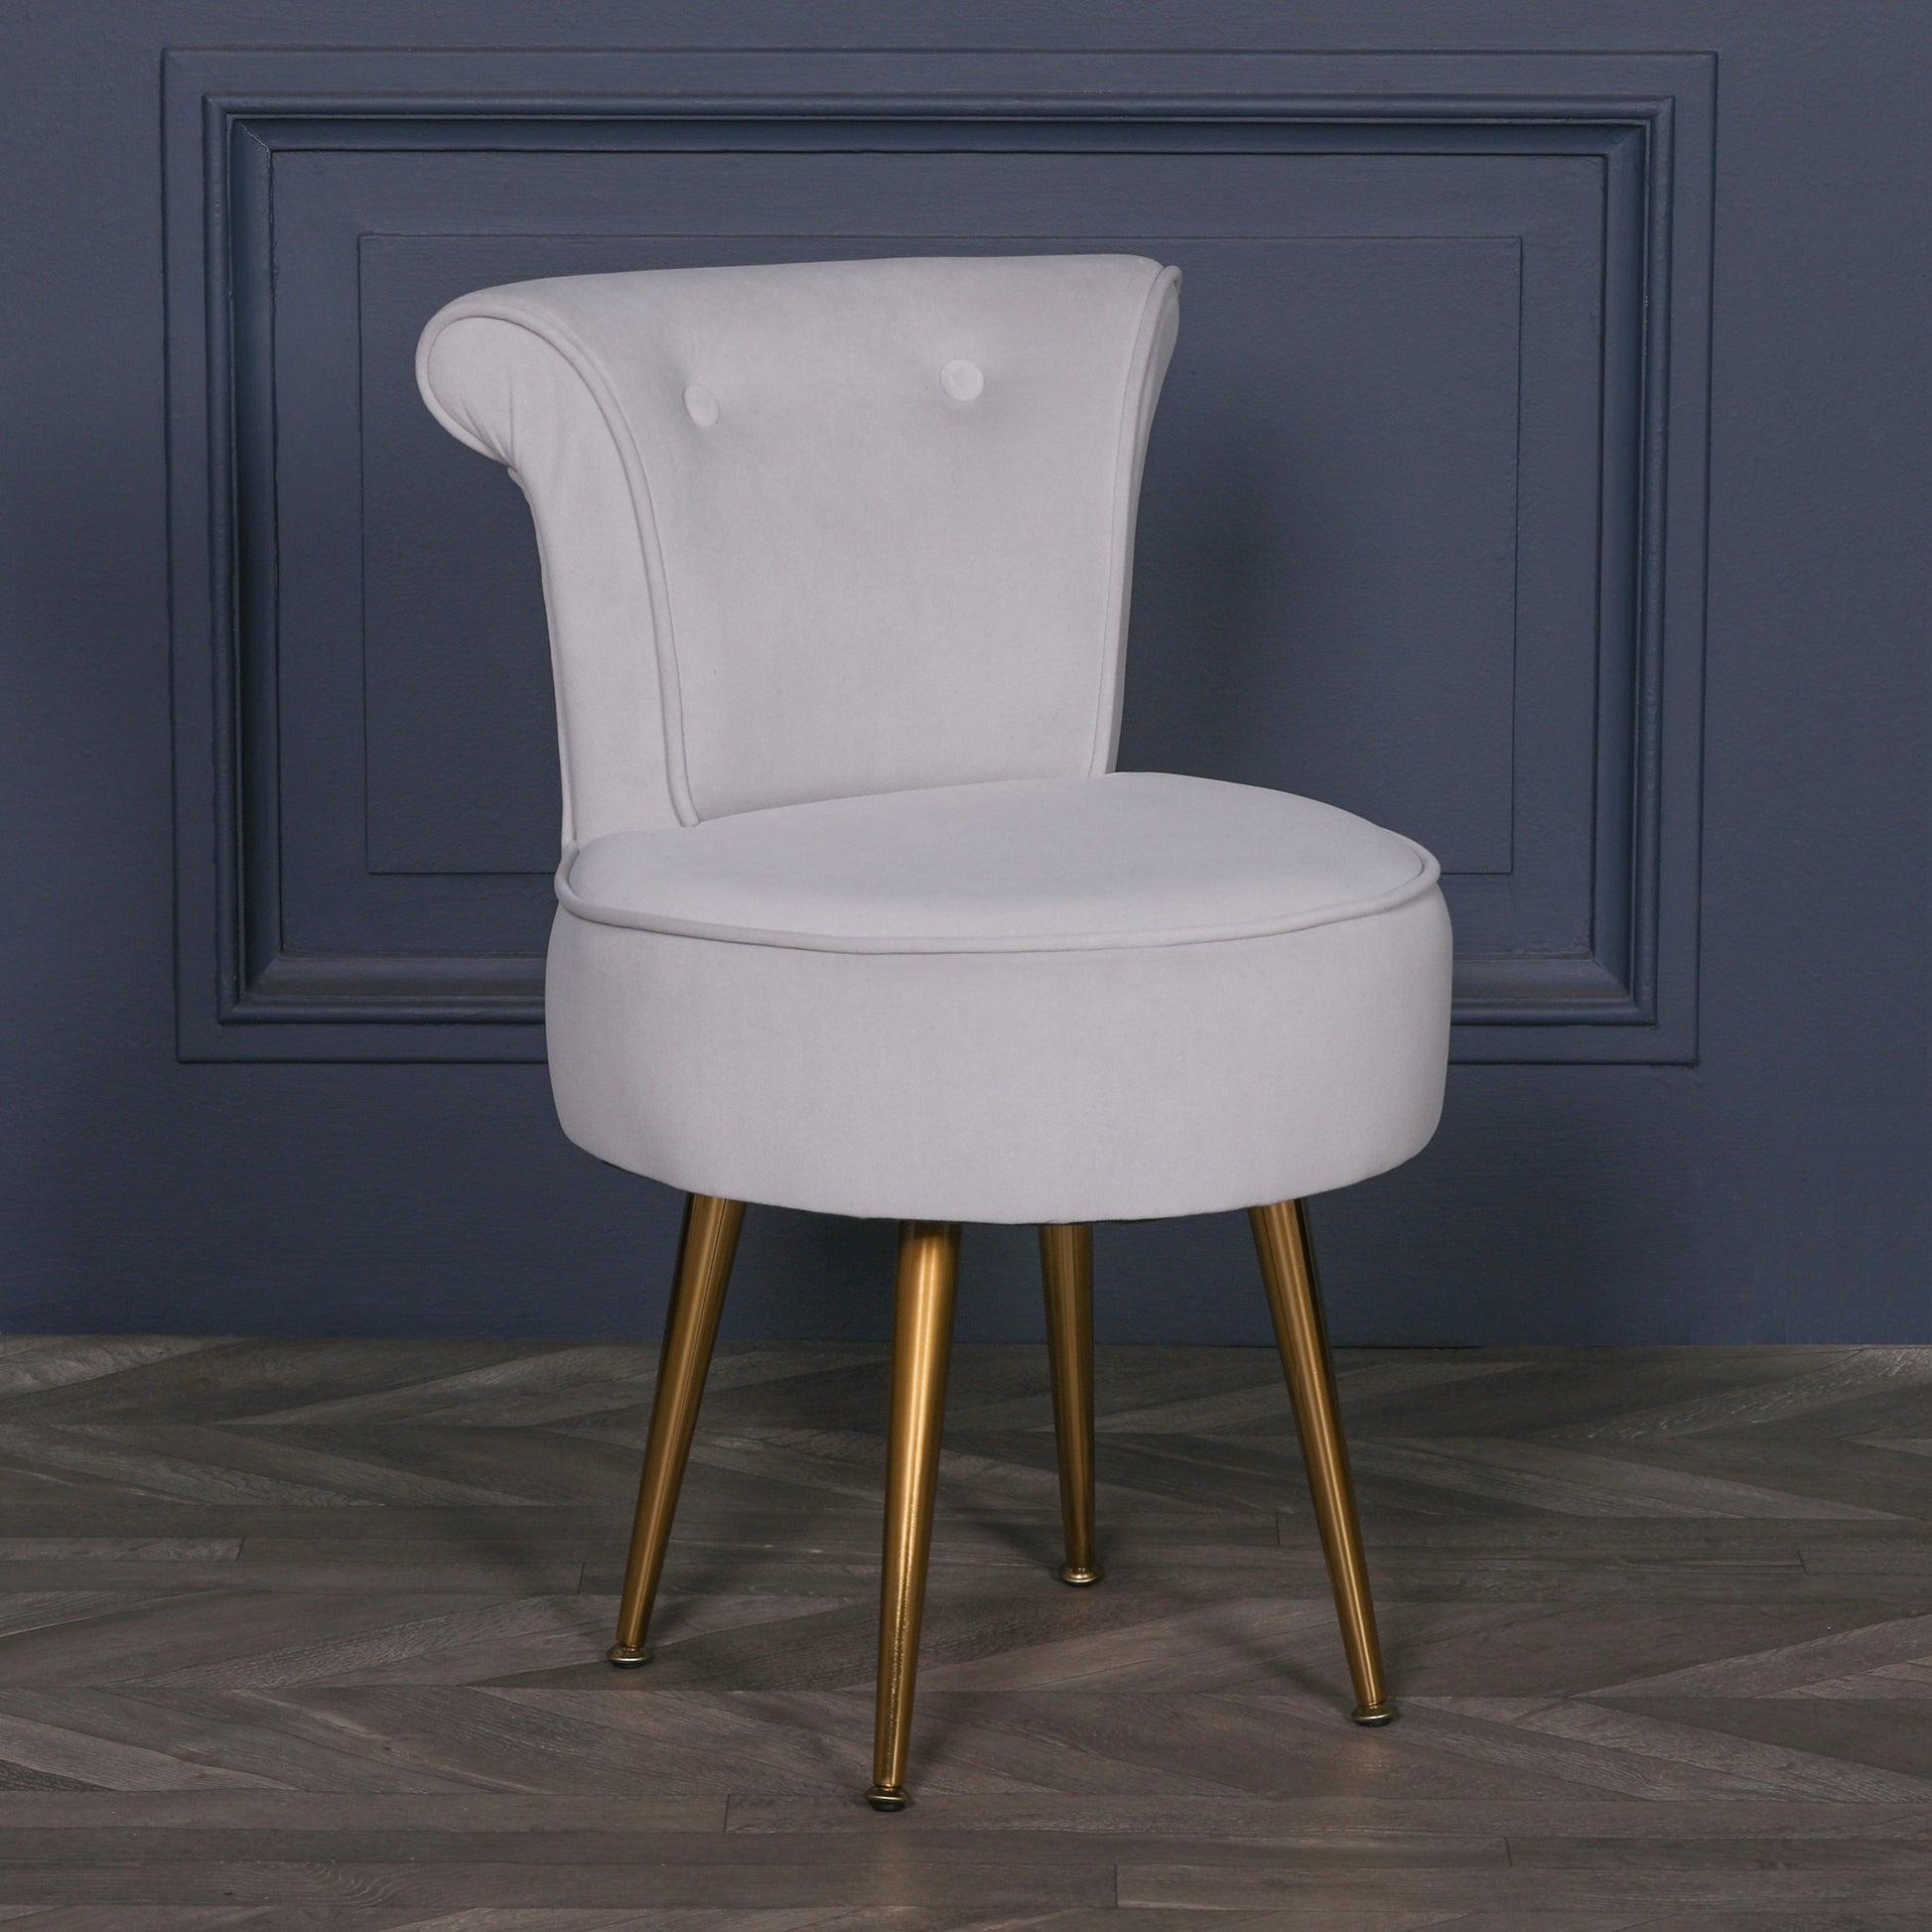 Grey Stool / Bedroom Chair with Gold Legs